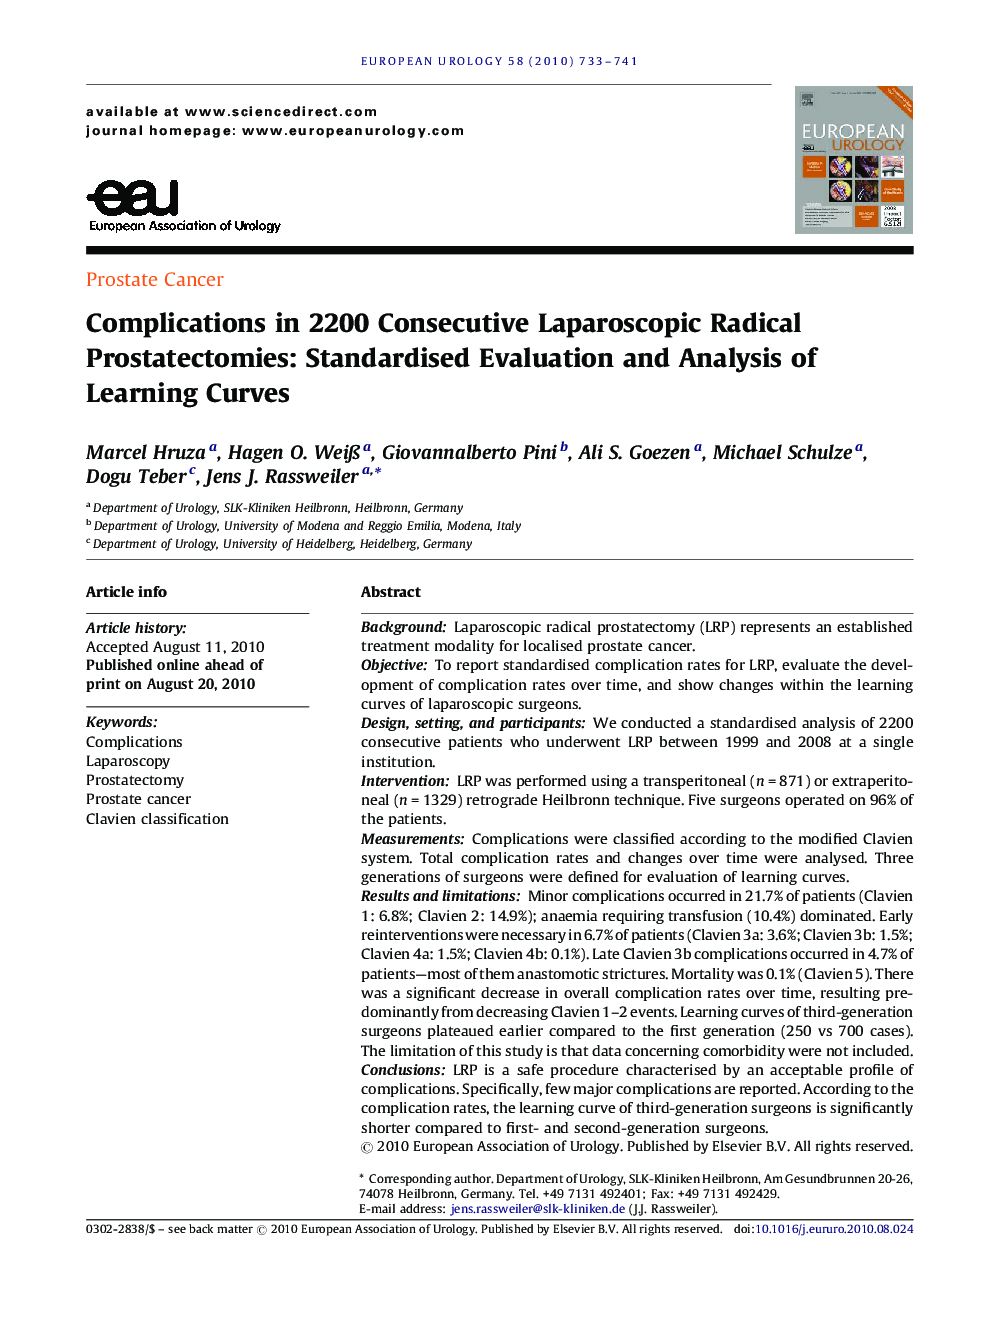 Complications in 2200 Consecutive Laparoscopic Radical Prostatectomies: Standardised Evaluation and Analysis of Learning Curves